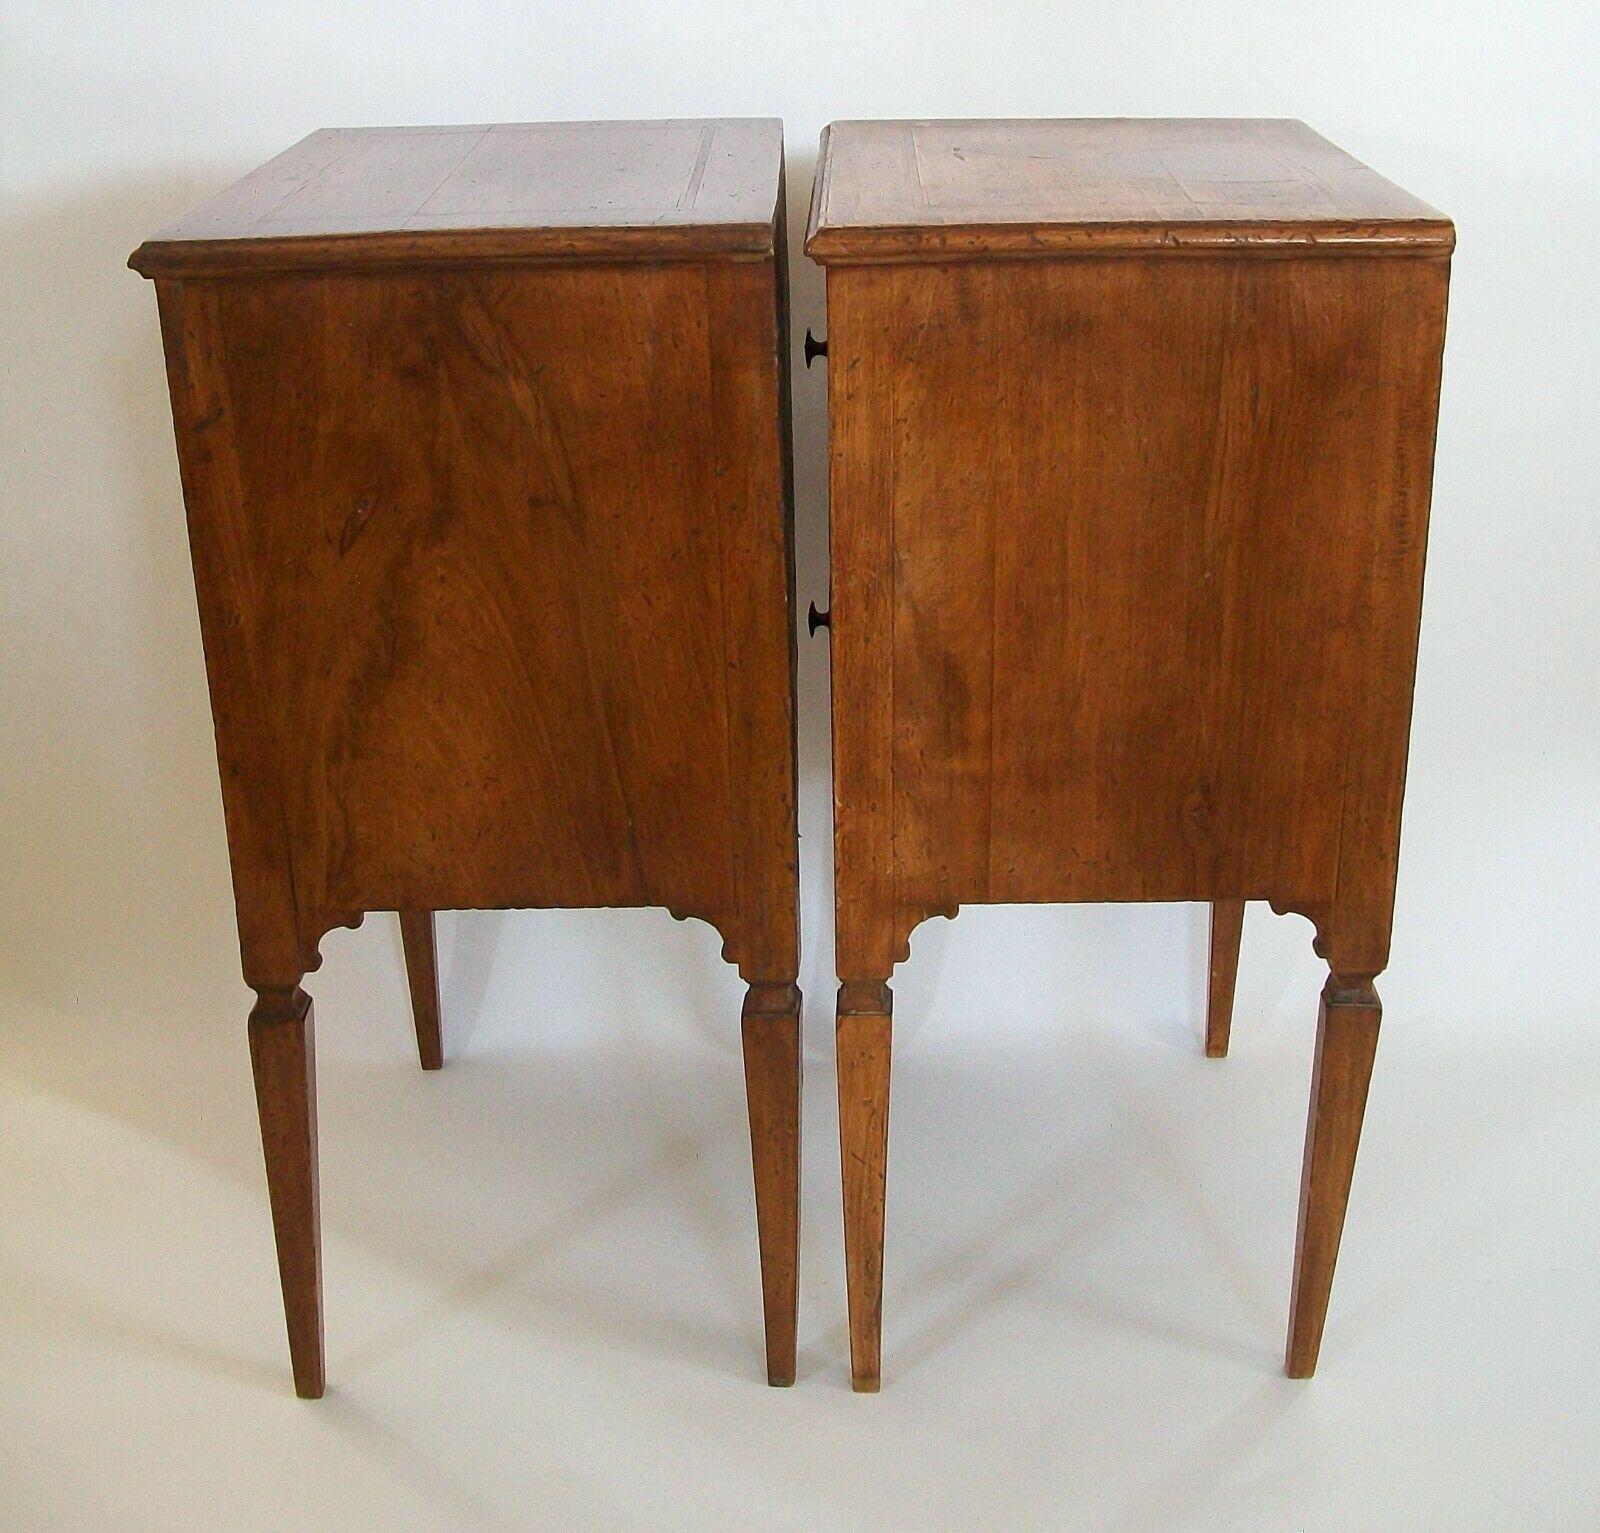 19th Century North Italian Antique Pair of Walnut Neoclassical Bedside Tables, Circa 1820 For Sale